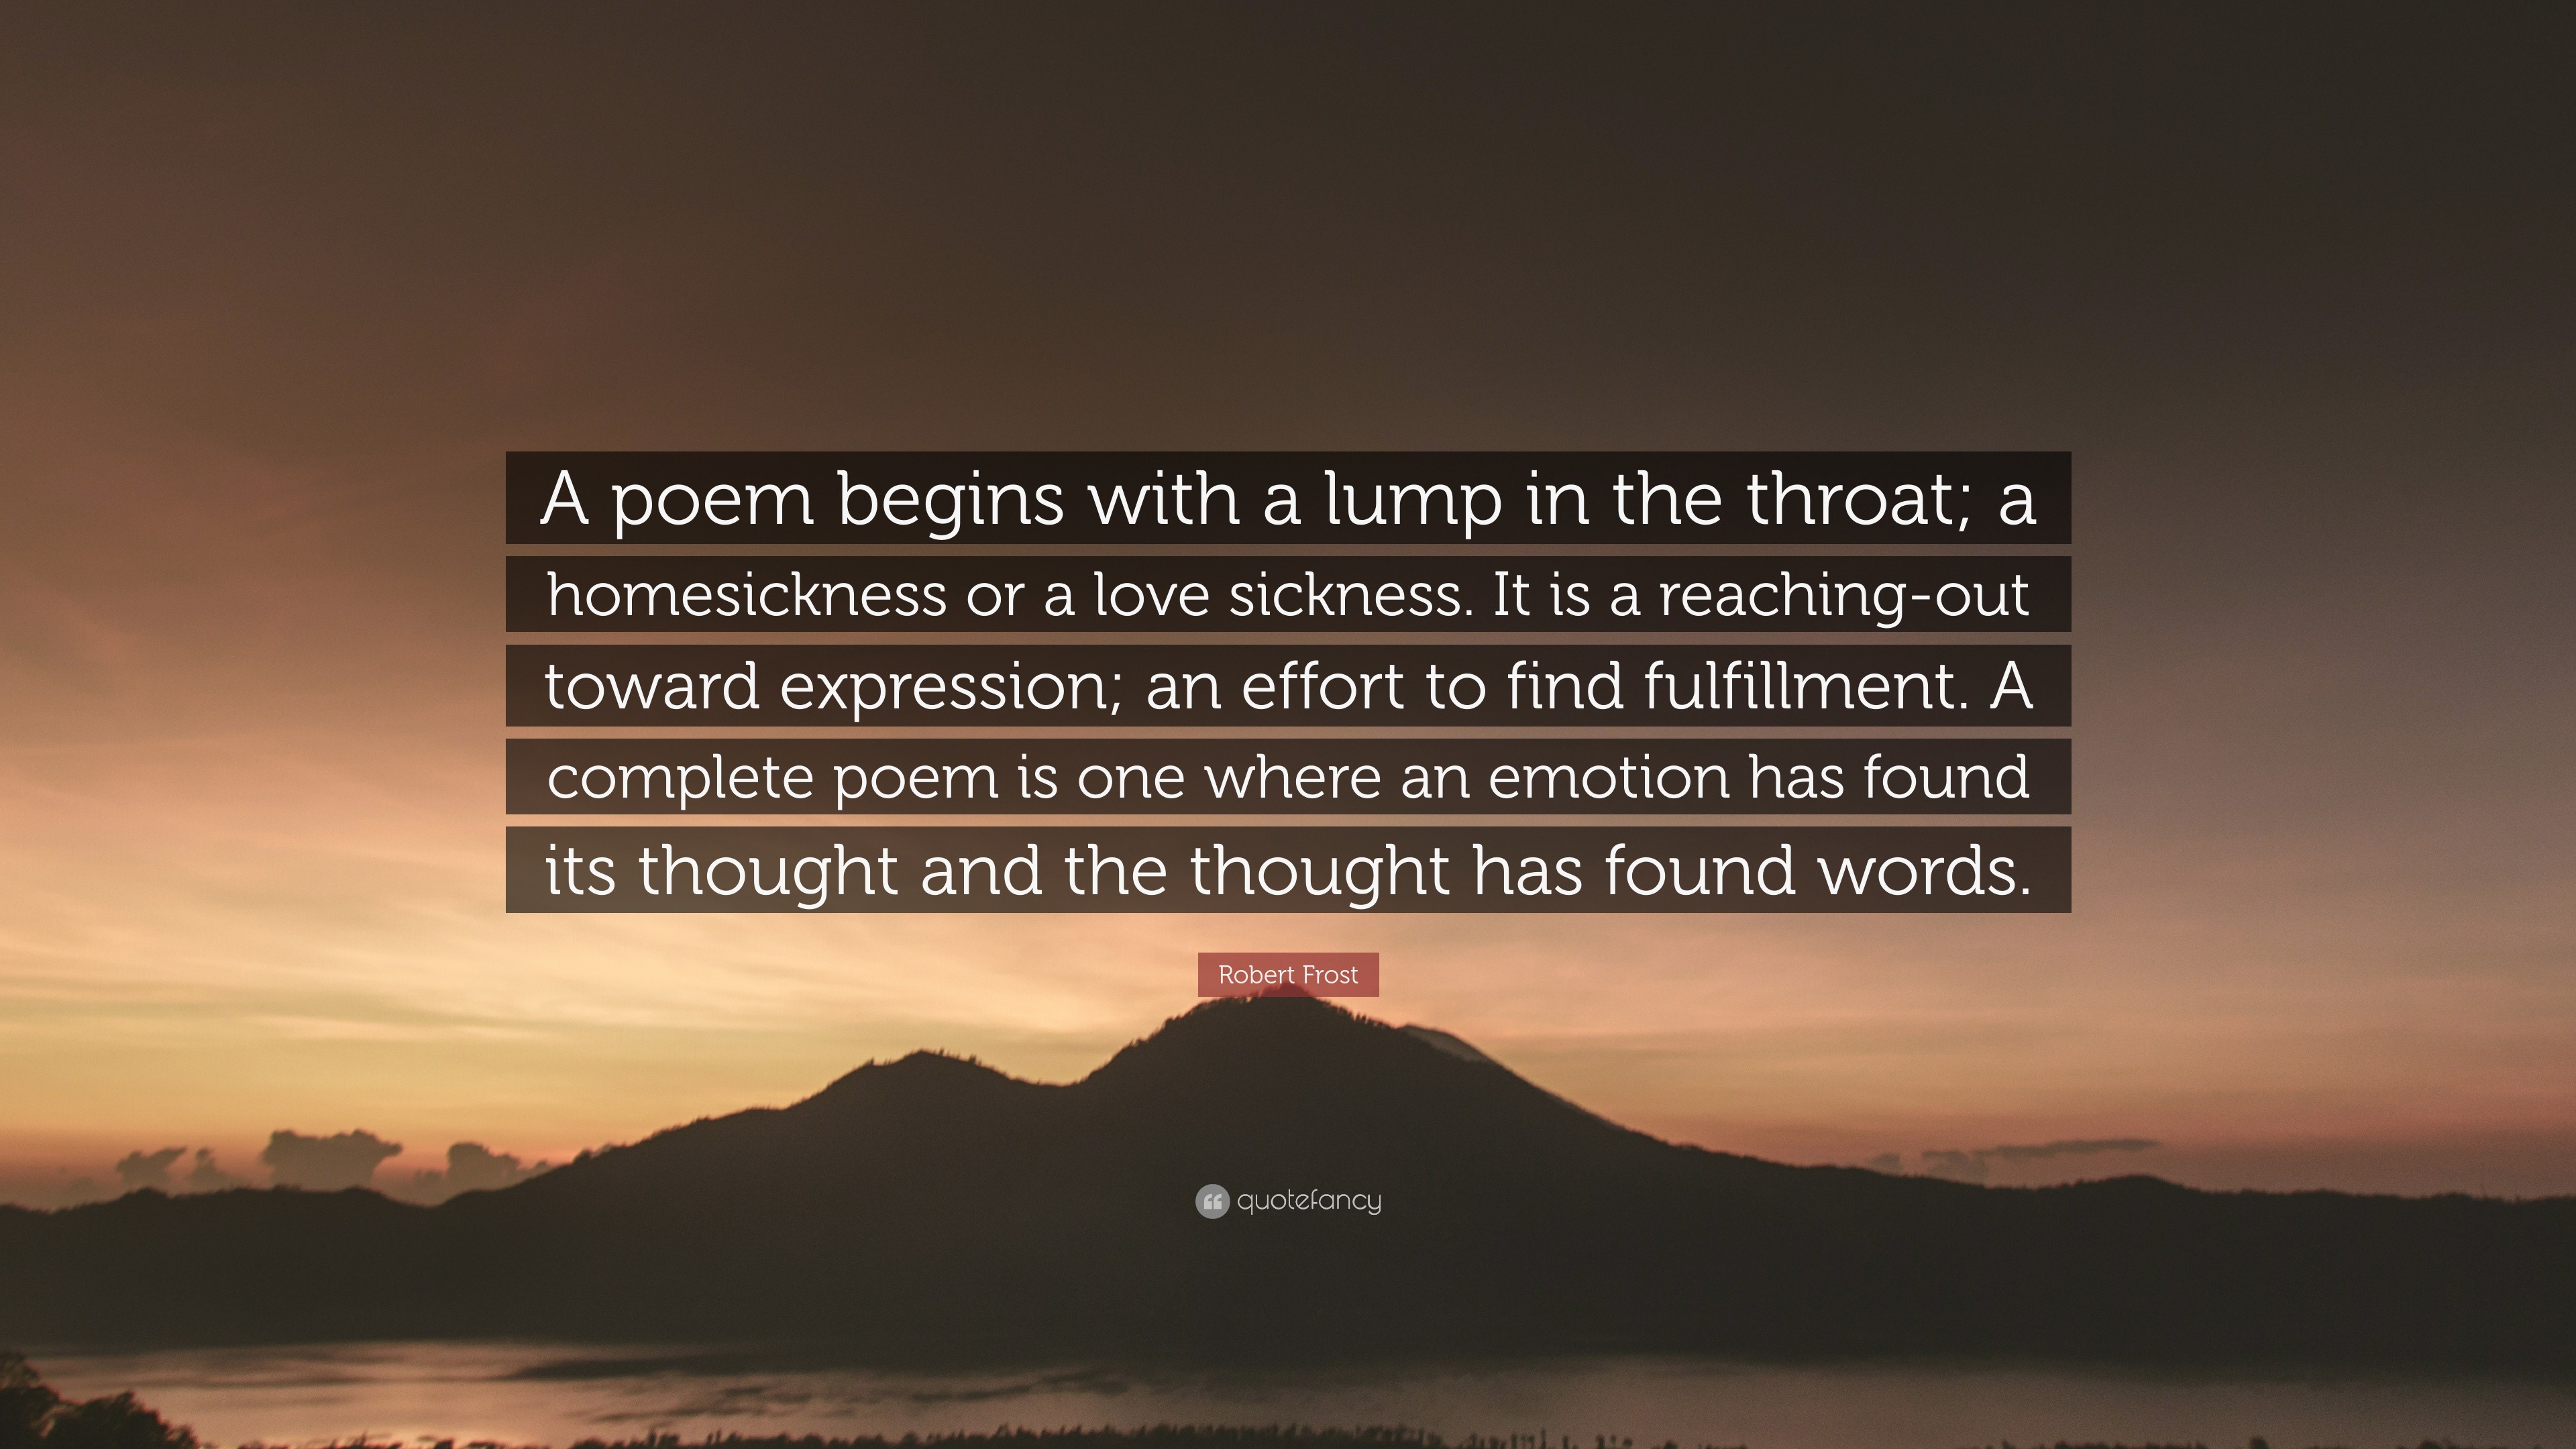 Robert Frost Quote “A poem begins with a lump in the throat a